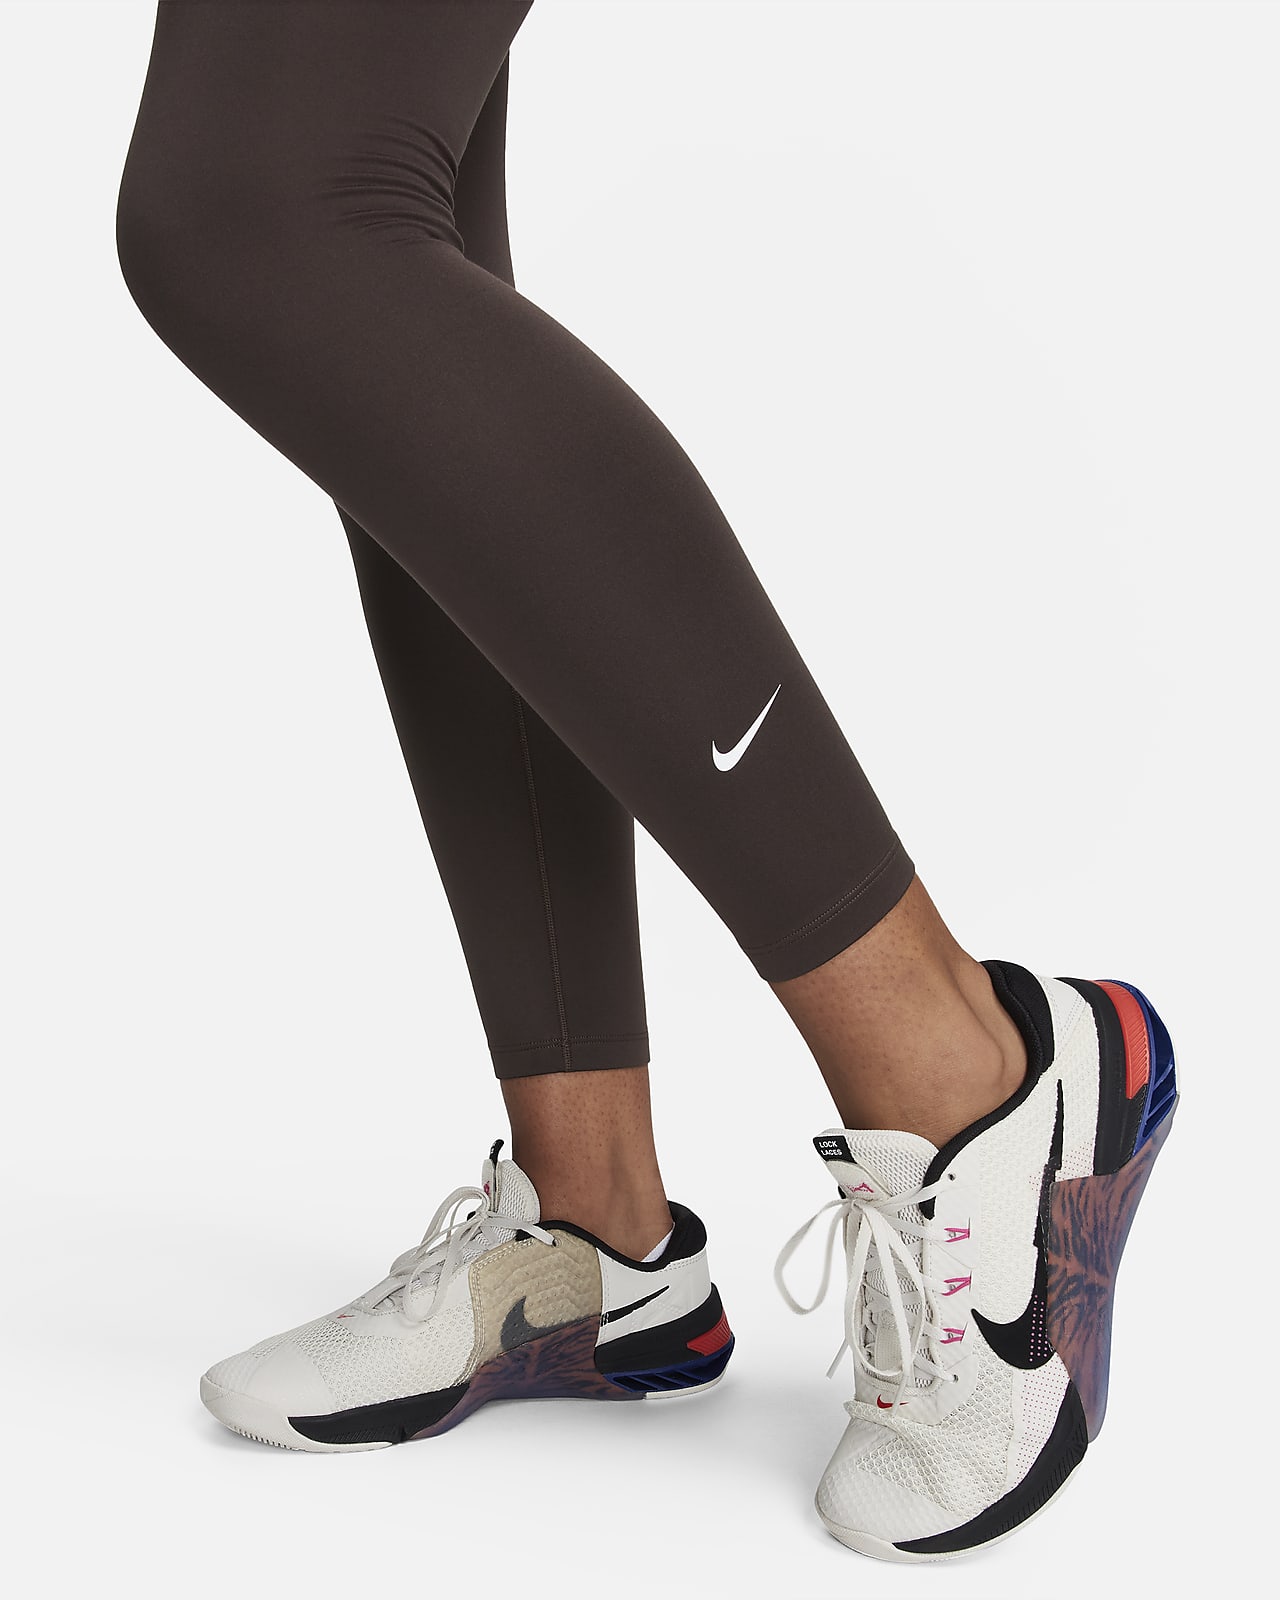 NWT Midnight Navy Nike One Luxe leggings 7/8 Length Dri-FIT $110 MSRP RARE  XS